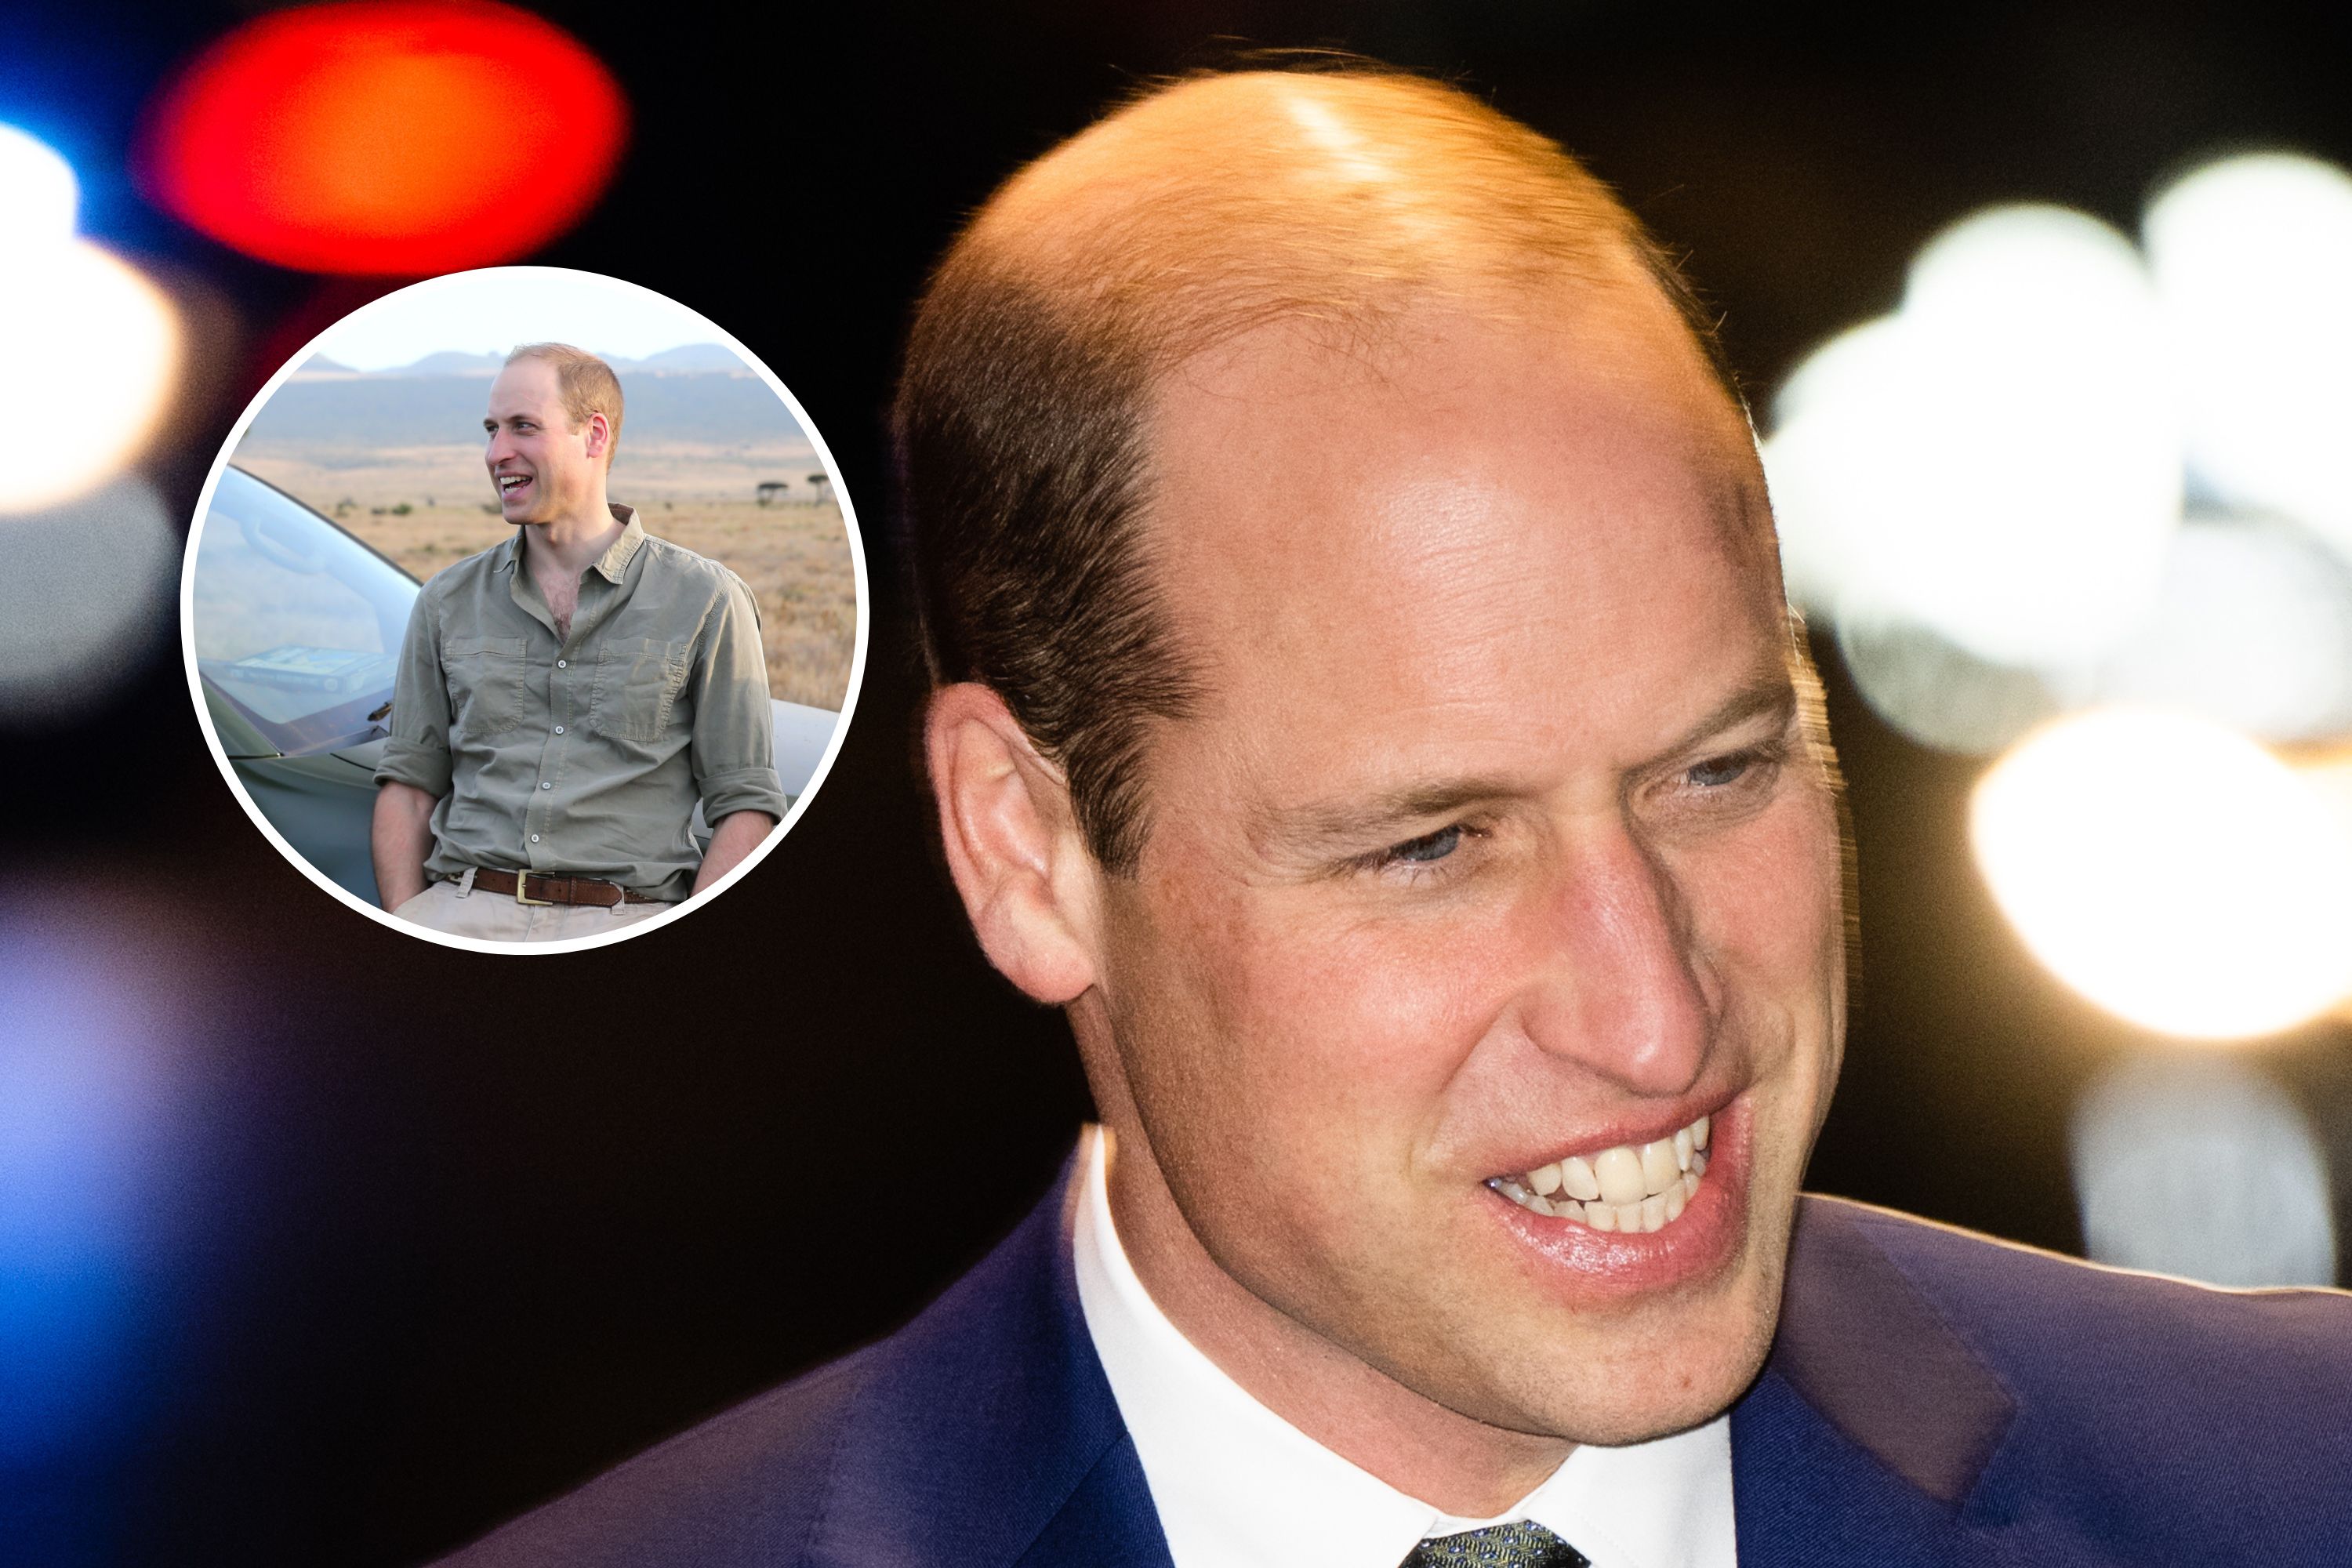 What Prince William Said About Africa Two Years After Race Scandal